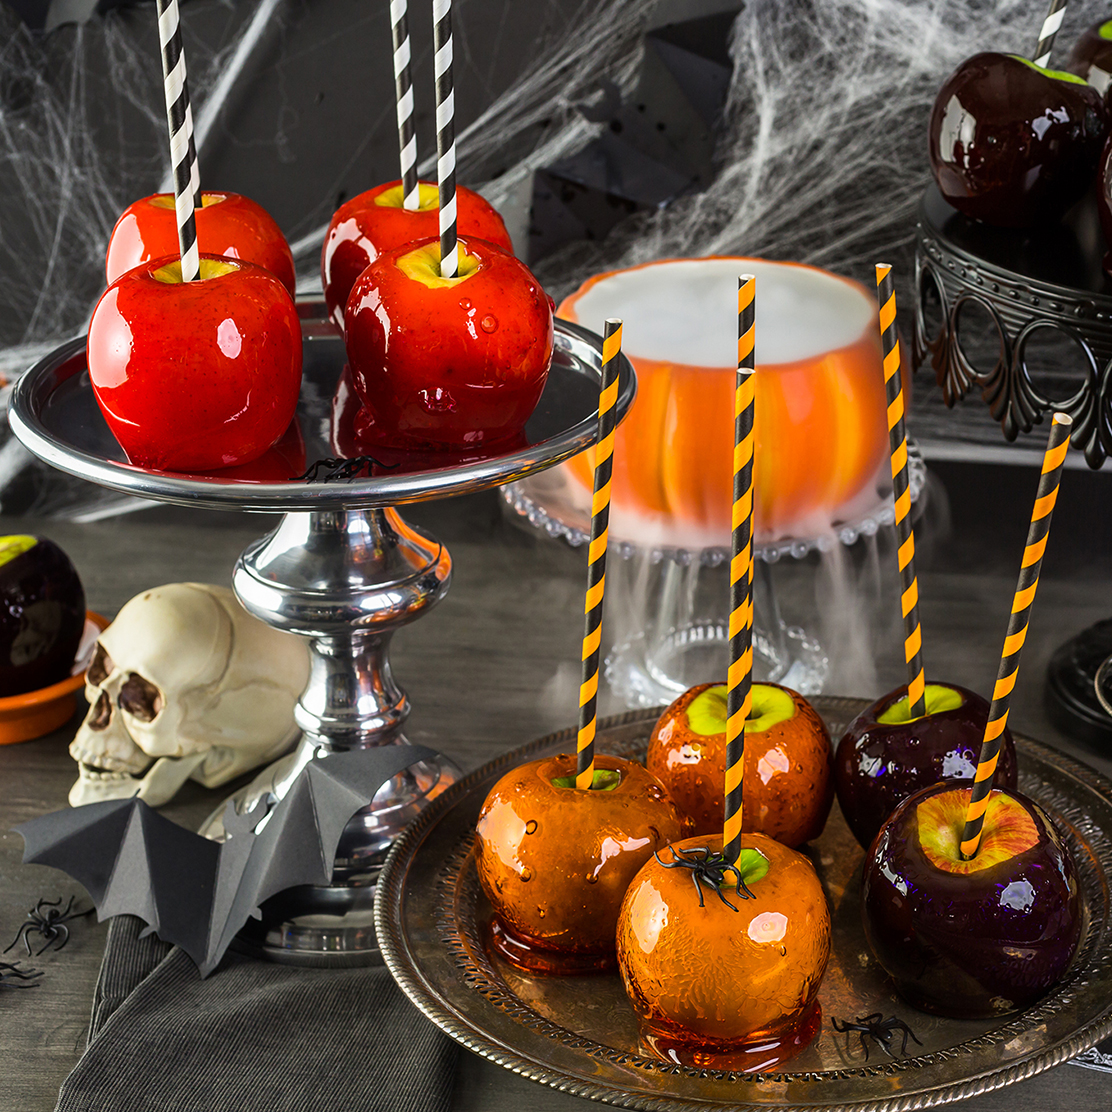 Sweet treats on Halloween can wreak havoc on children's dental health, so get creative about what you hand out. This is a decorative image of Halloween-themed treats on a table.